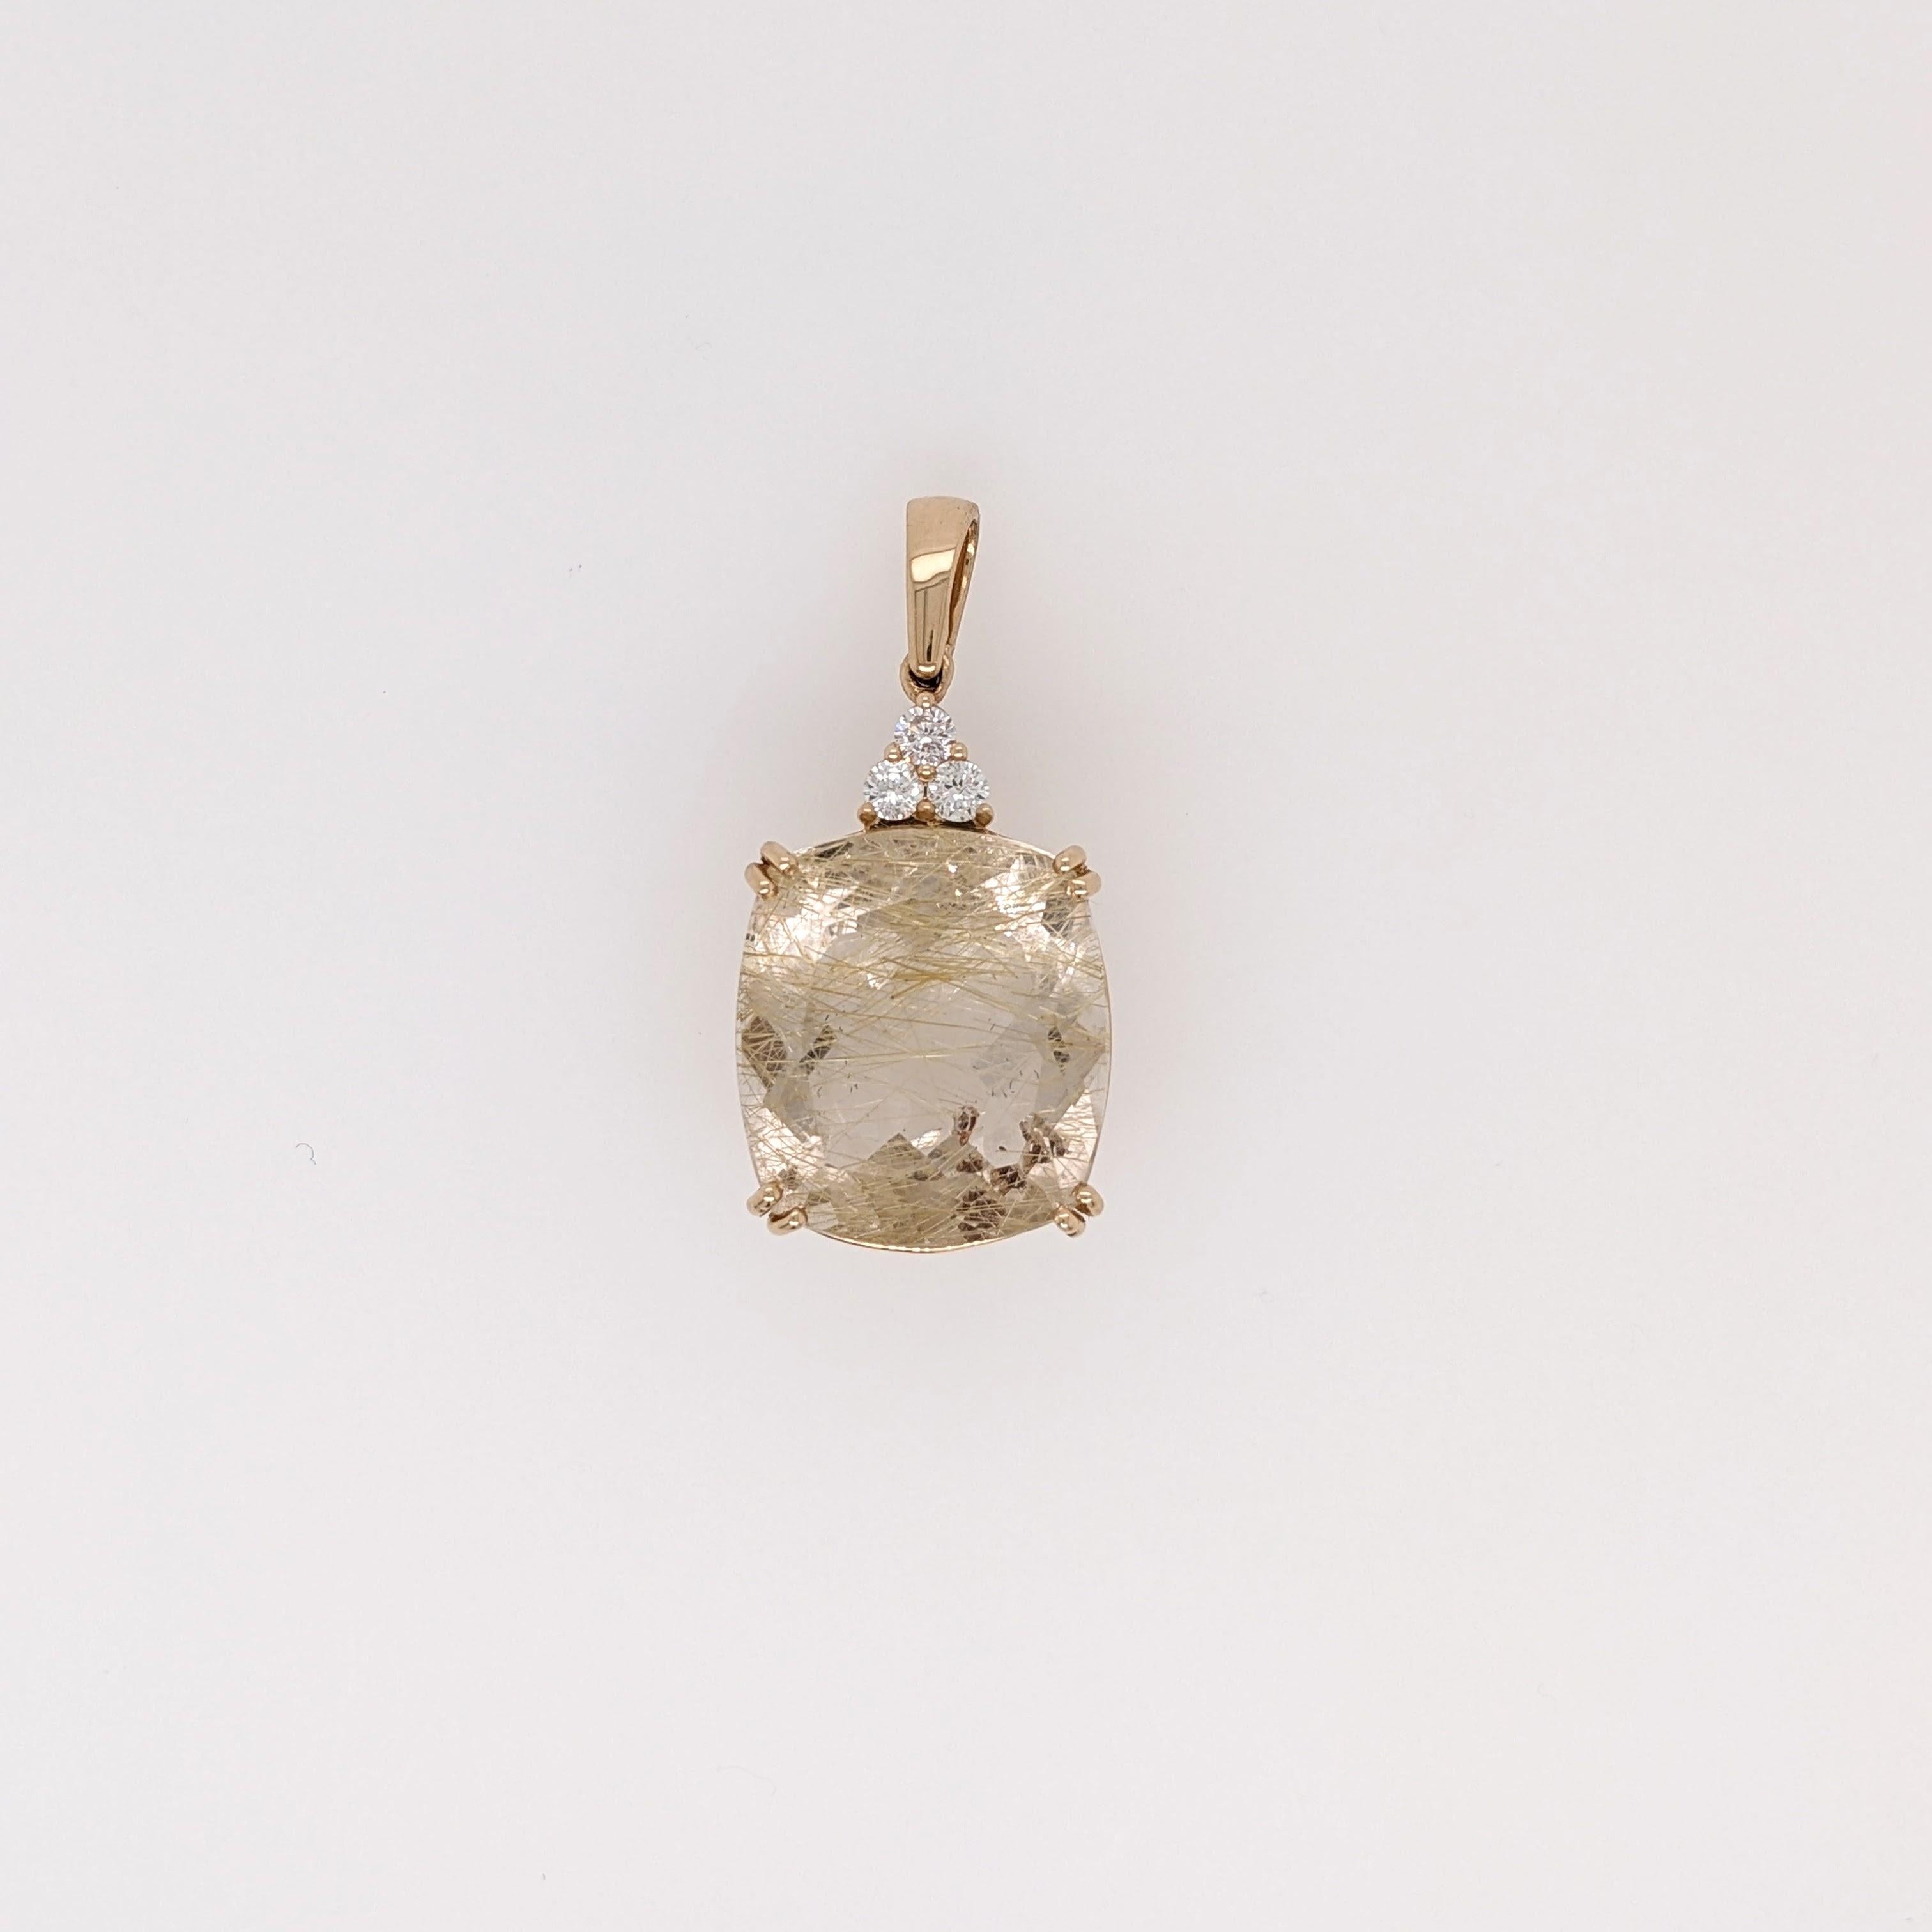 This beautiful rutilated quartz pendant can make a stunning addition to any outfit! Set in 14k solid gold with sparkly natural diamond accents.

Specifications:

Item Type: Pendant
Center Stone: Quartz
Treatment: None
Weight: 18.1ct
Head size: